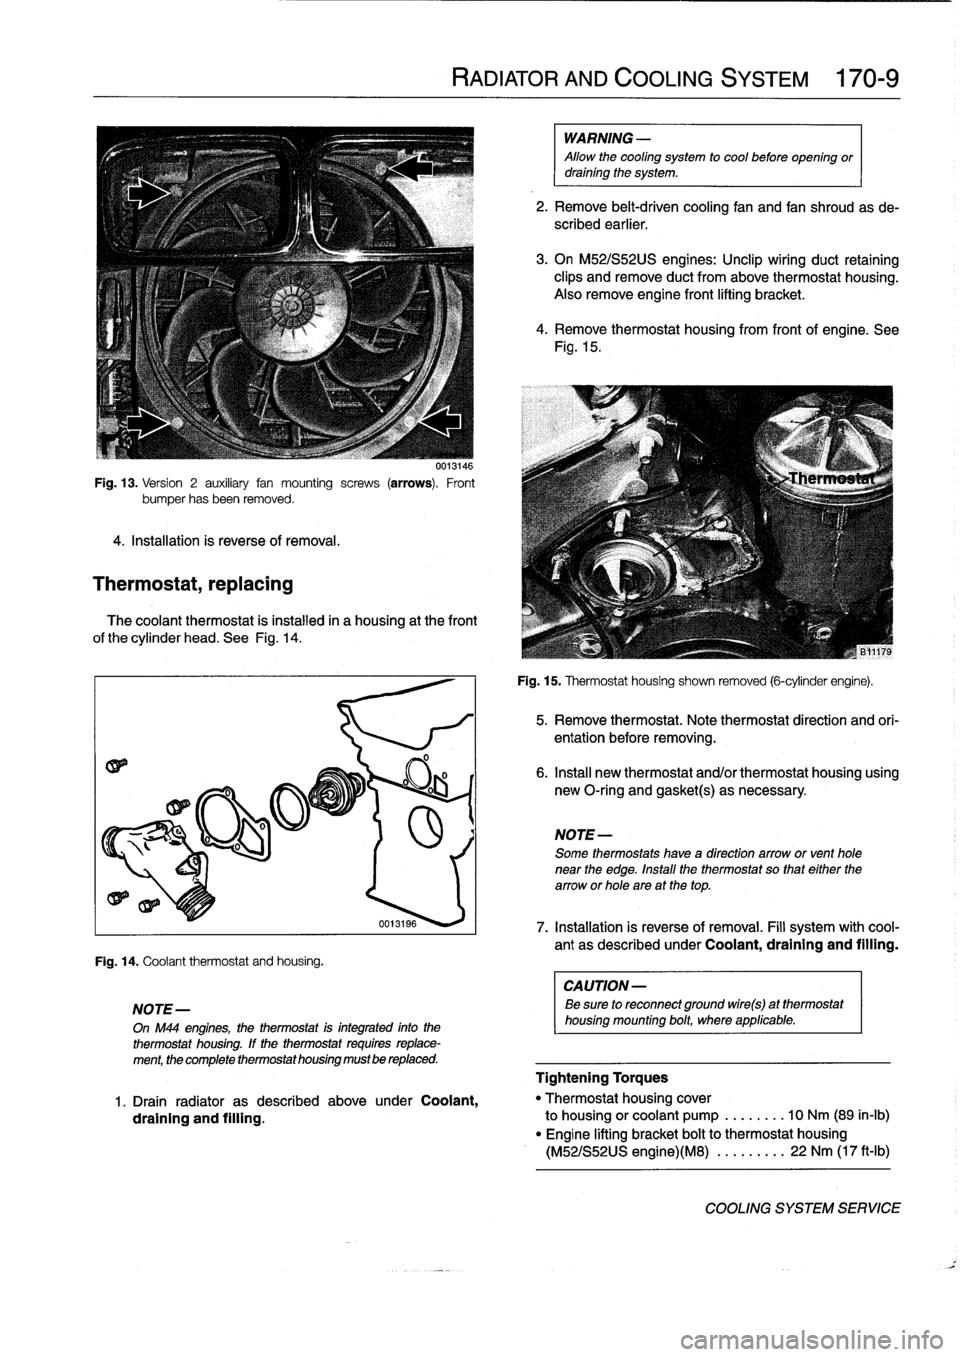 BMW 323i 1993 E36 Repair Manual 
Fig
.
13
.
Version
2
auxiliary
fan
mounting
screws
(arrows)
.
Front
bumper
hasbeen
removed
.

4
.
Installation
is
reverse
of
removal
.

Thermostat,
replacing

0013146

The
coolant
thermostat
is
insta